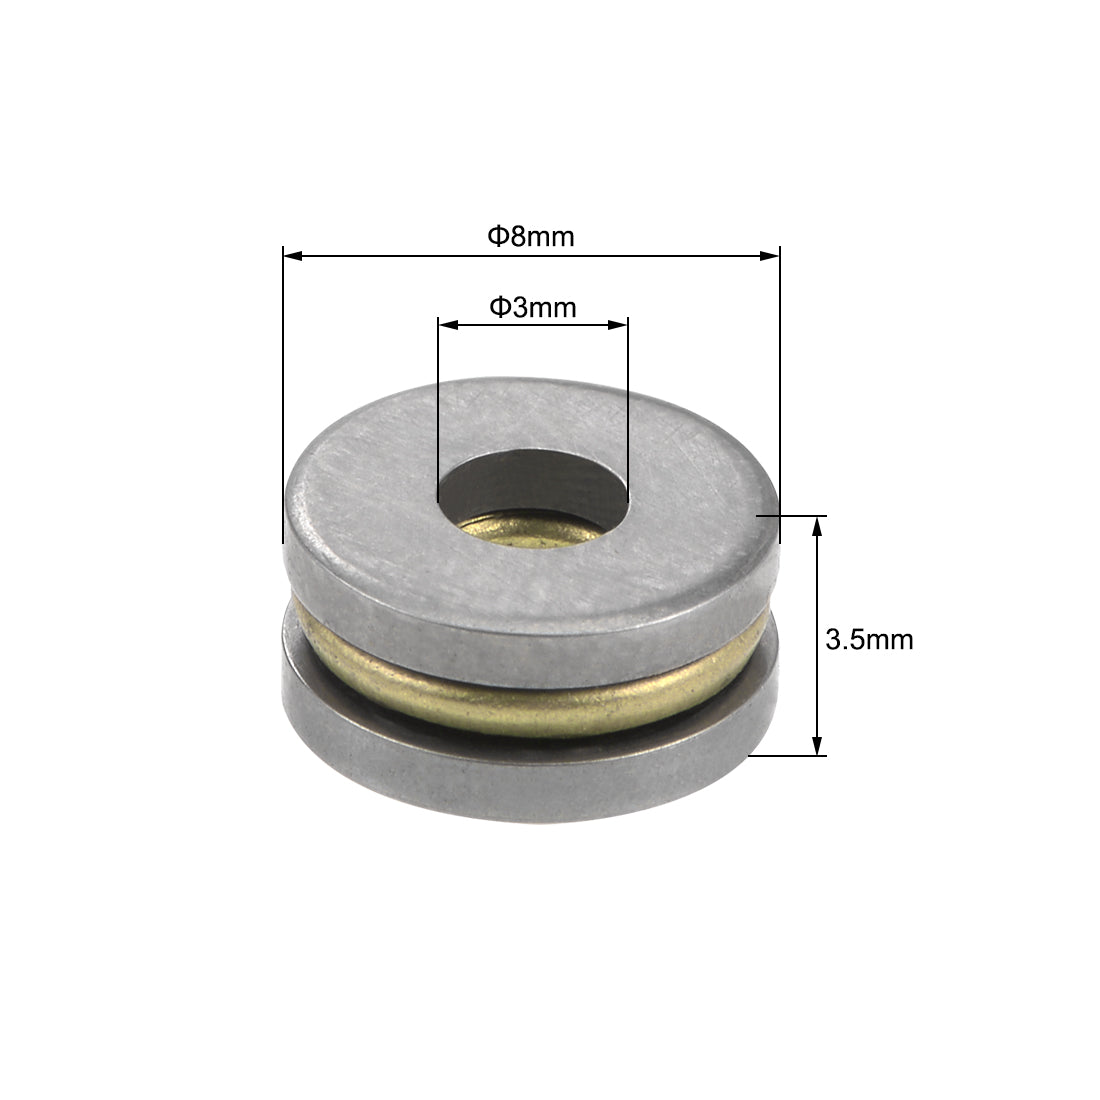 uxcell Uxcell F3-8M Miniature Thrust Ball Bearing 3x8x3.5mm Chrome Steel with Washer 10Pcs